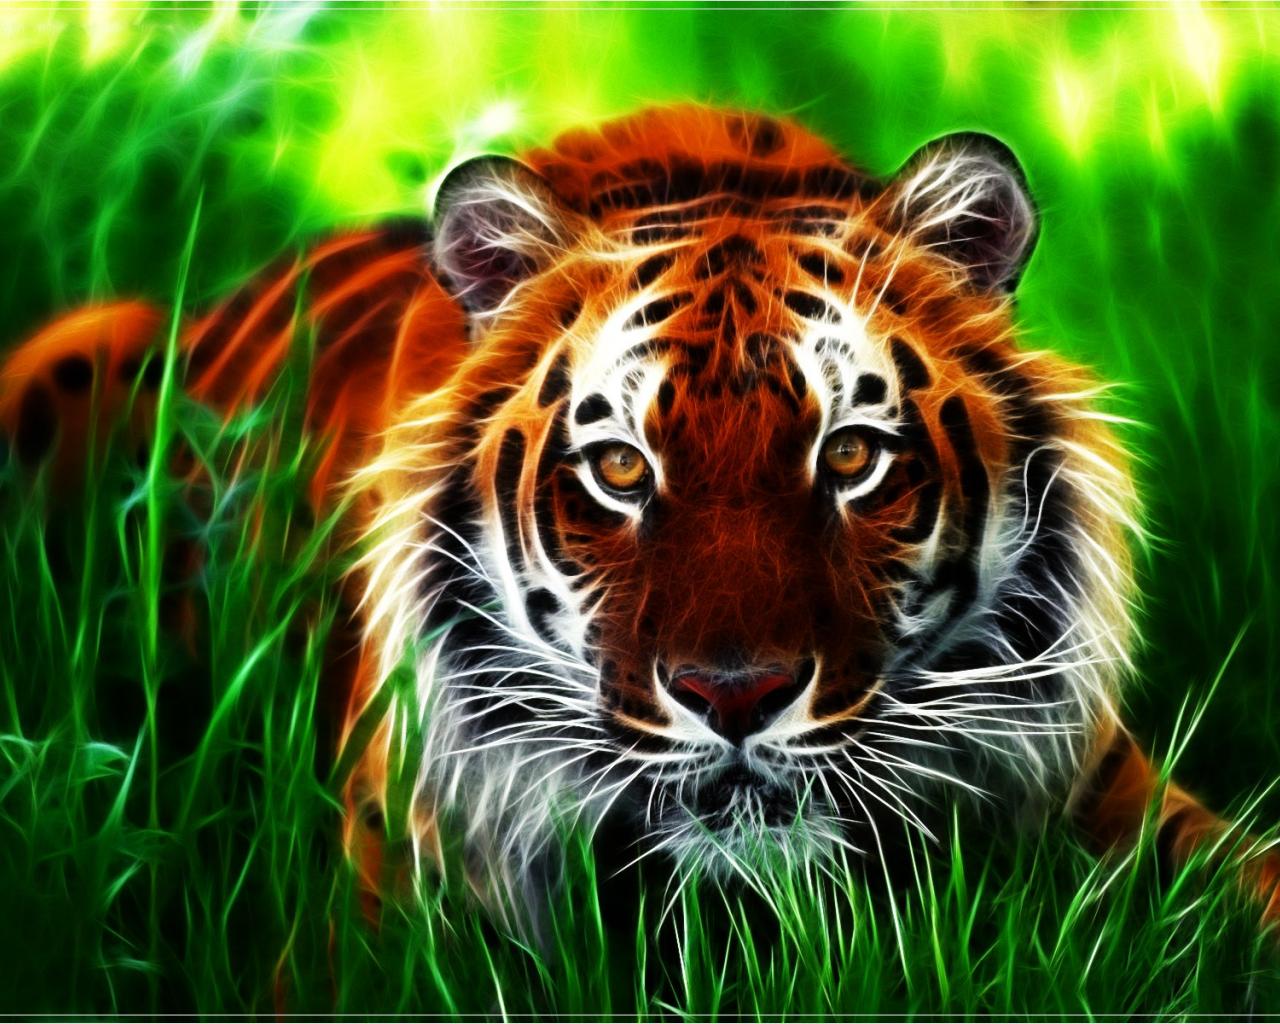 National geographics tiger wallpaper - - High Quality and other